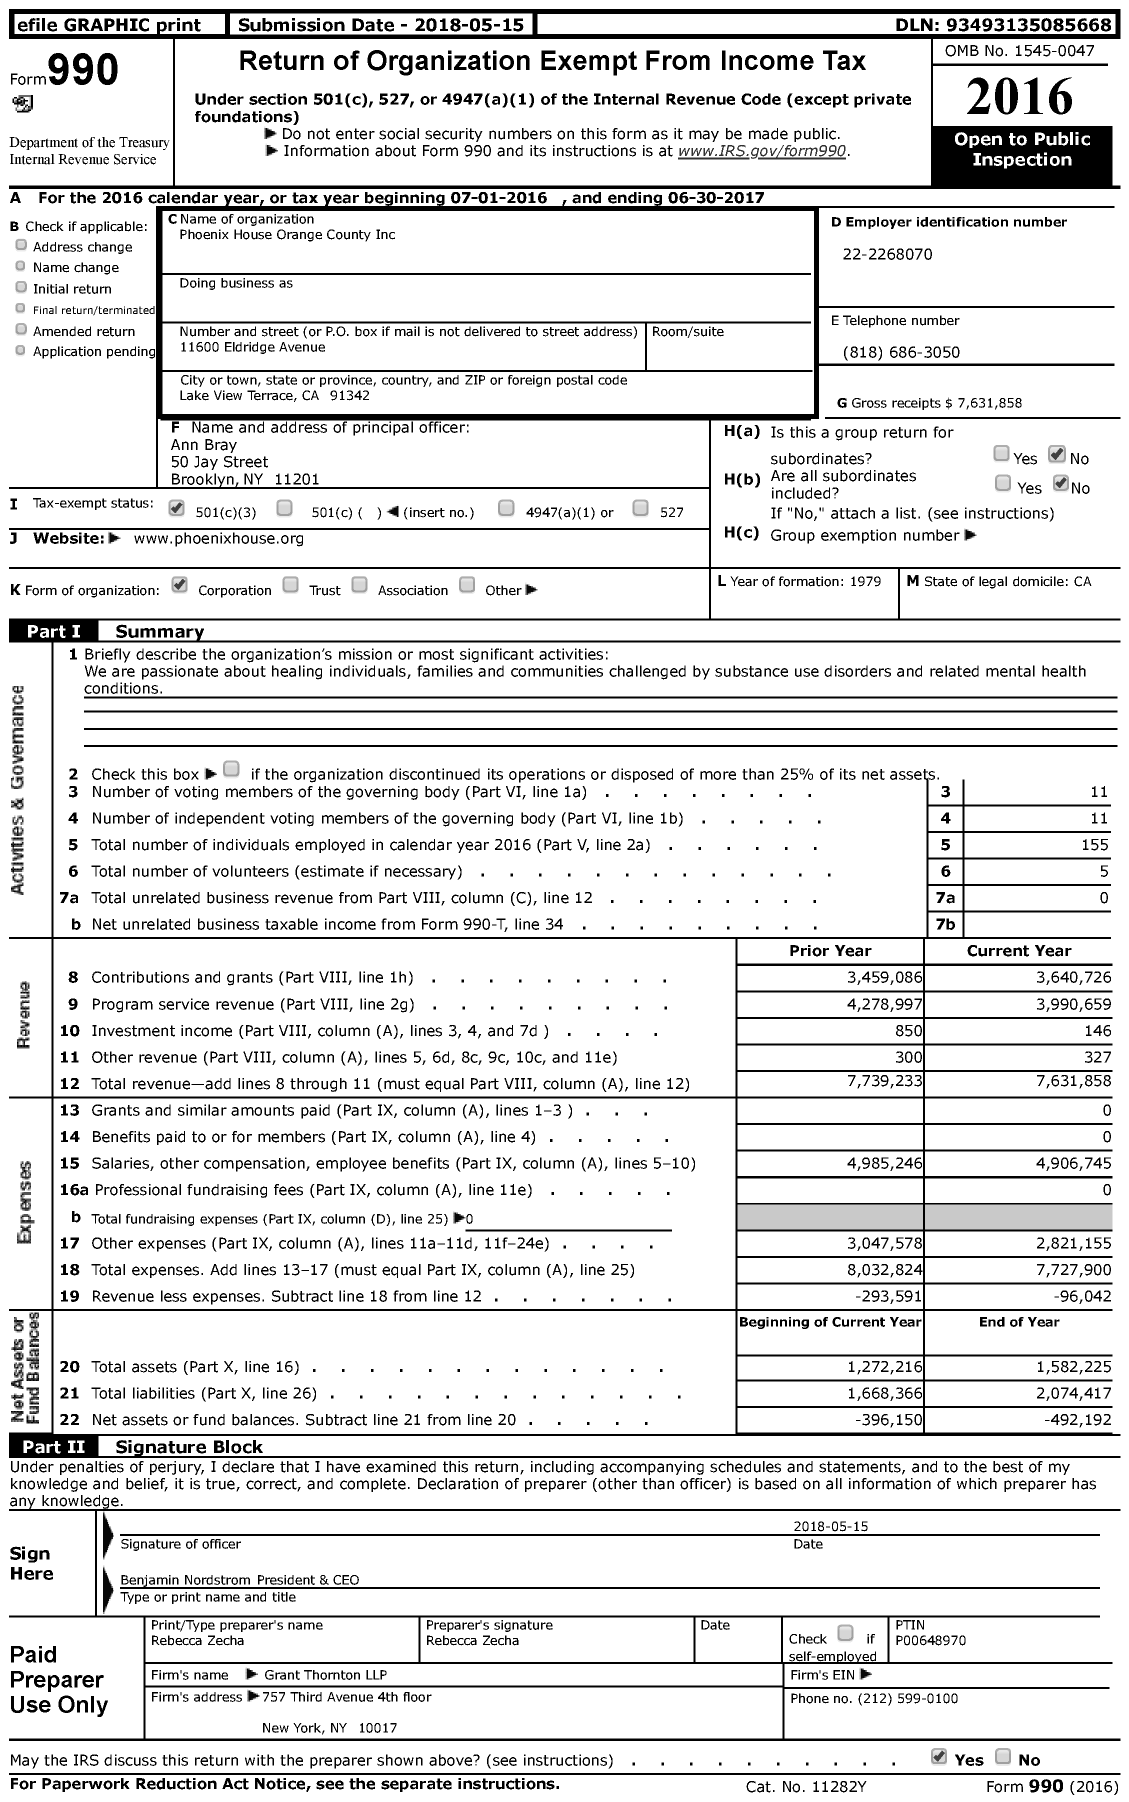 Image of first page of 2016 Form 990 for Phoenix House Orange County (PHOC)